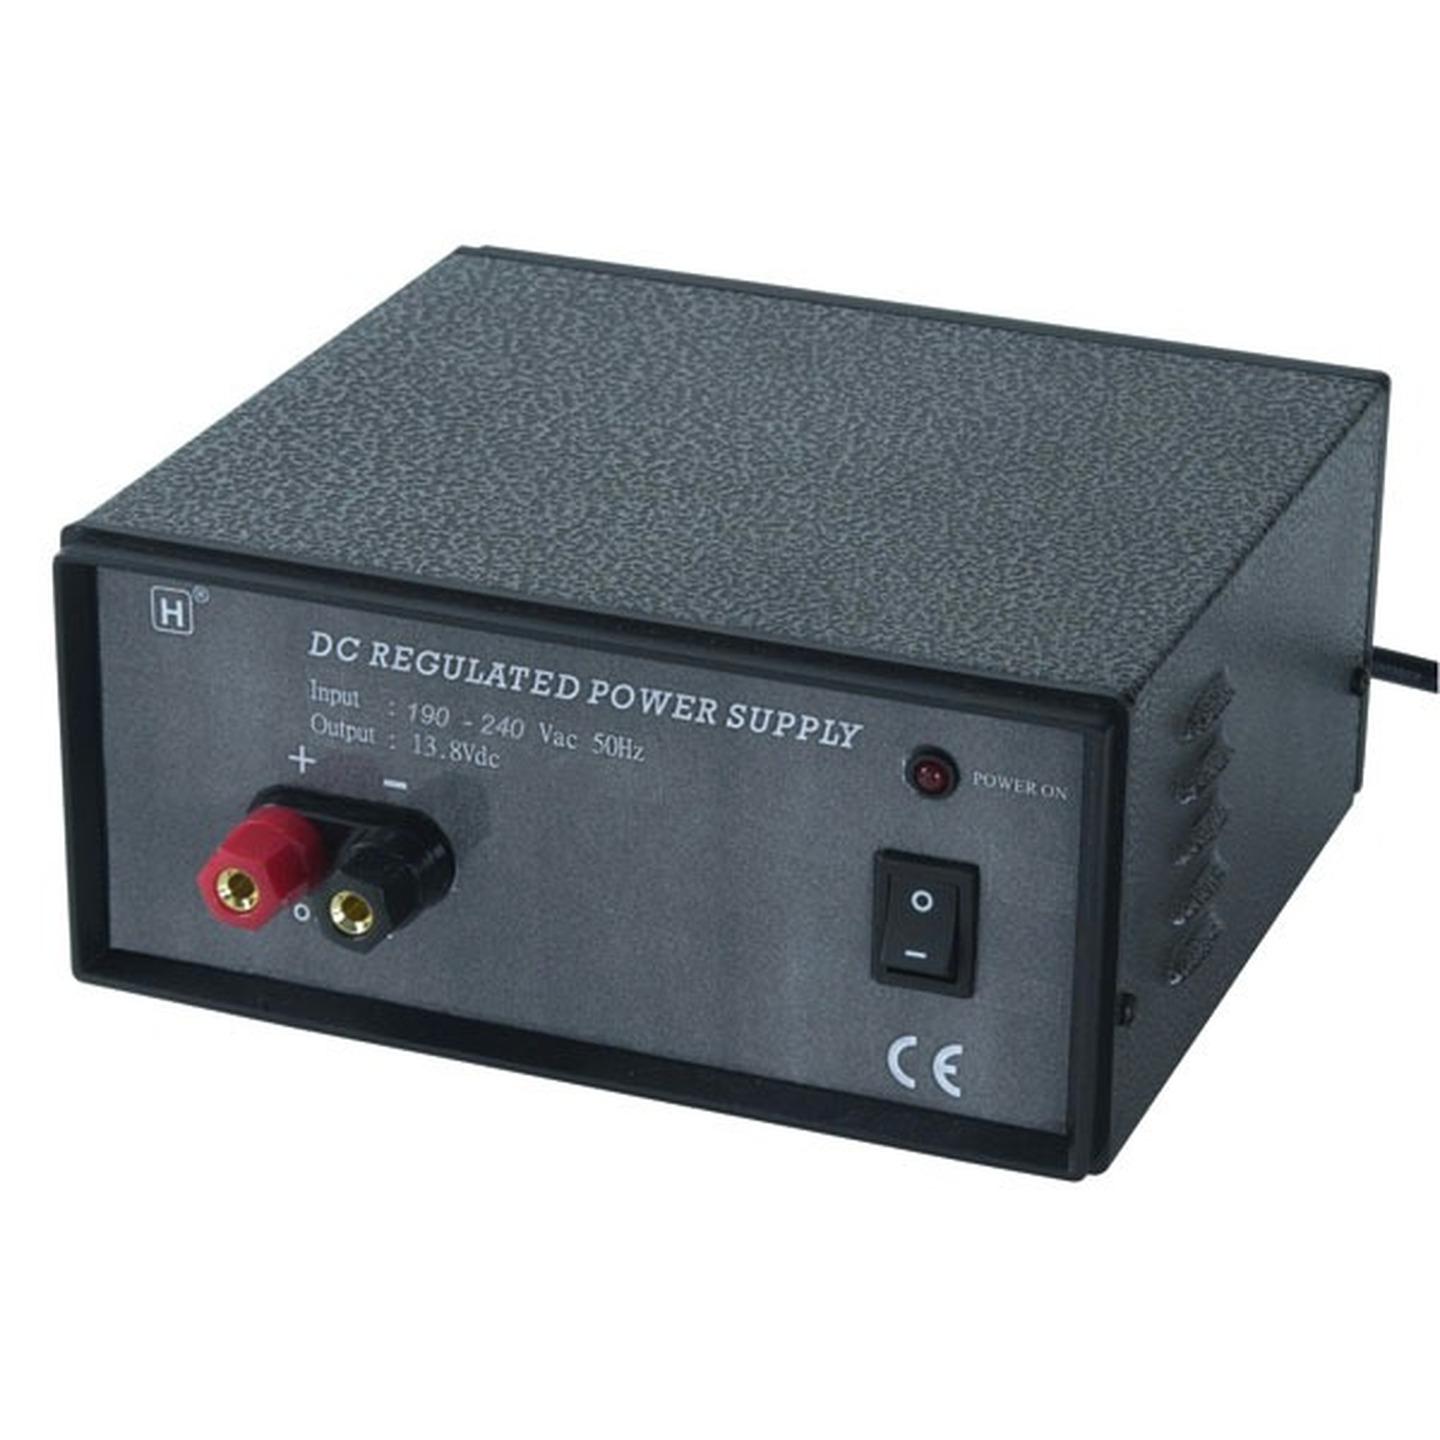 Bench Power Supply 13.8V 12A Switchmode